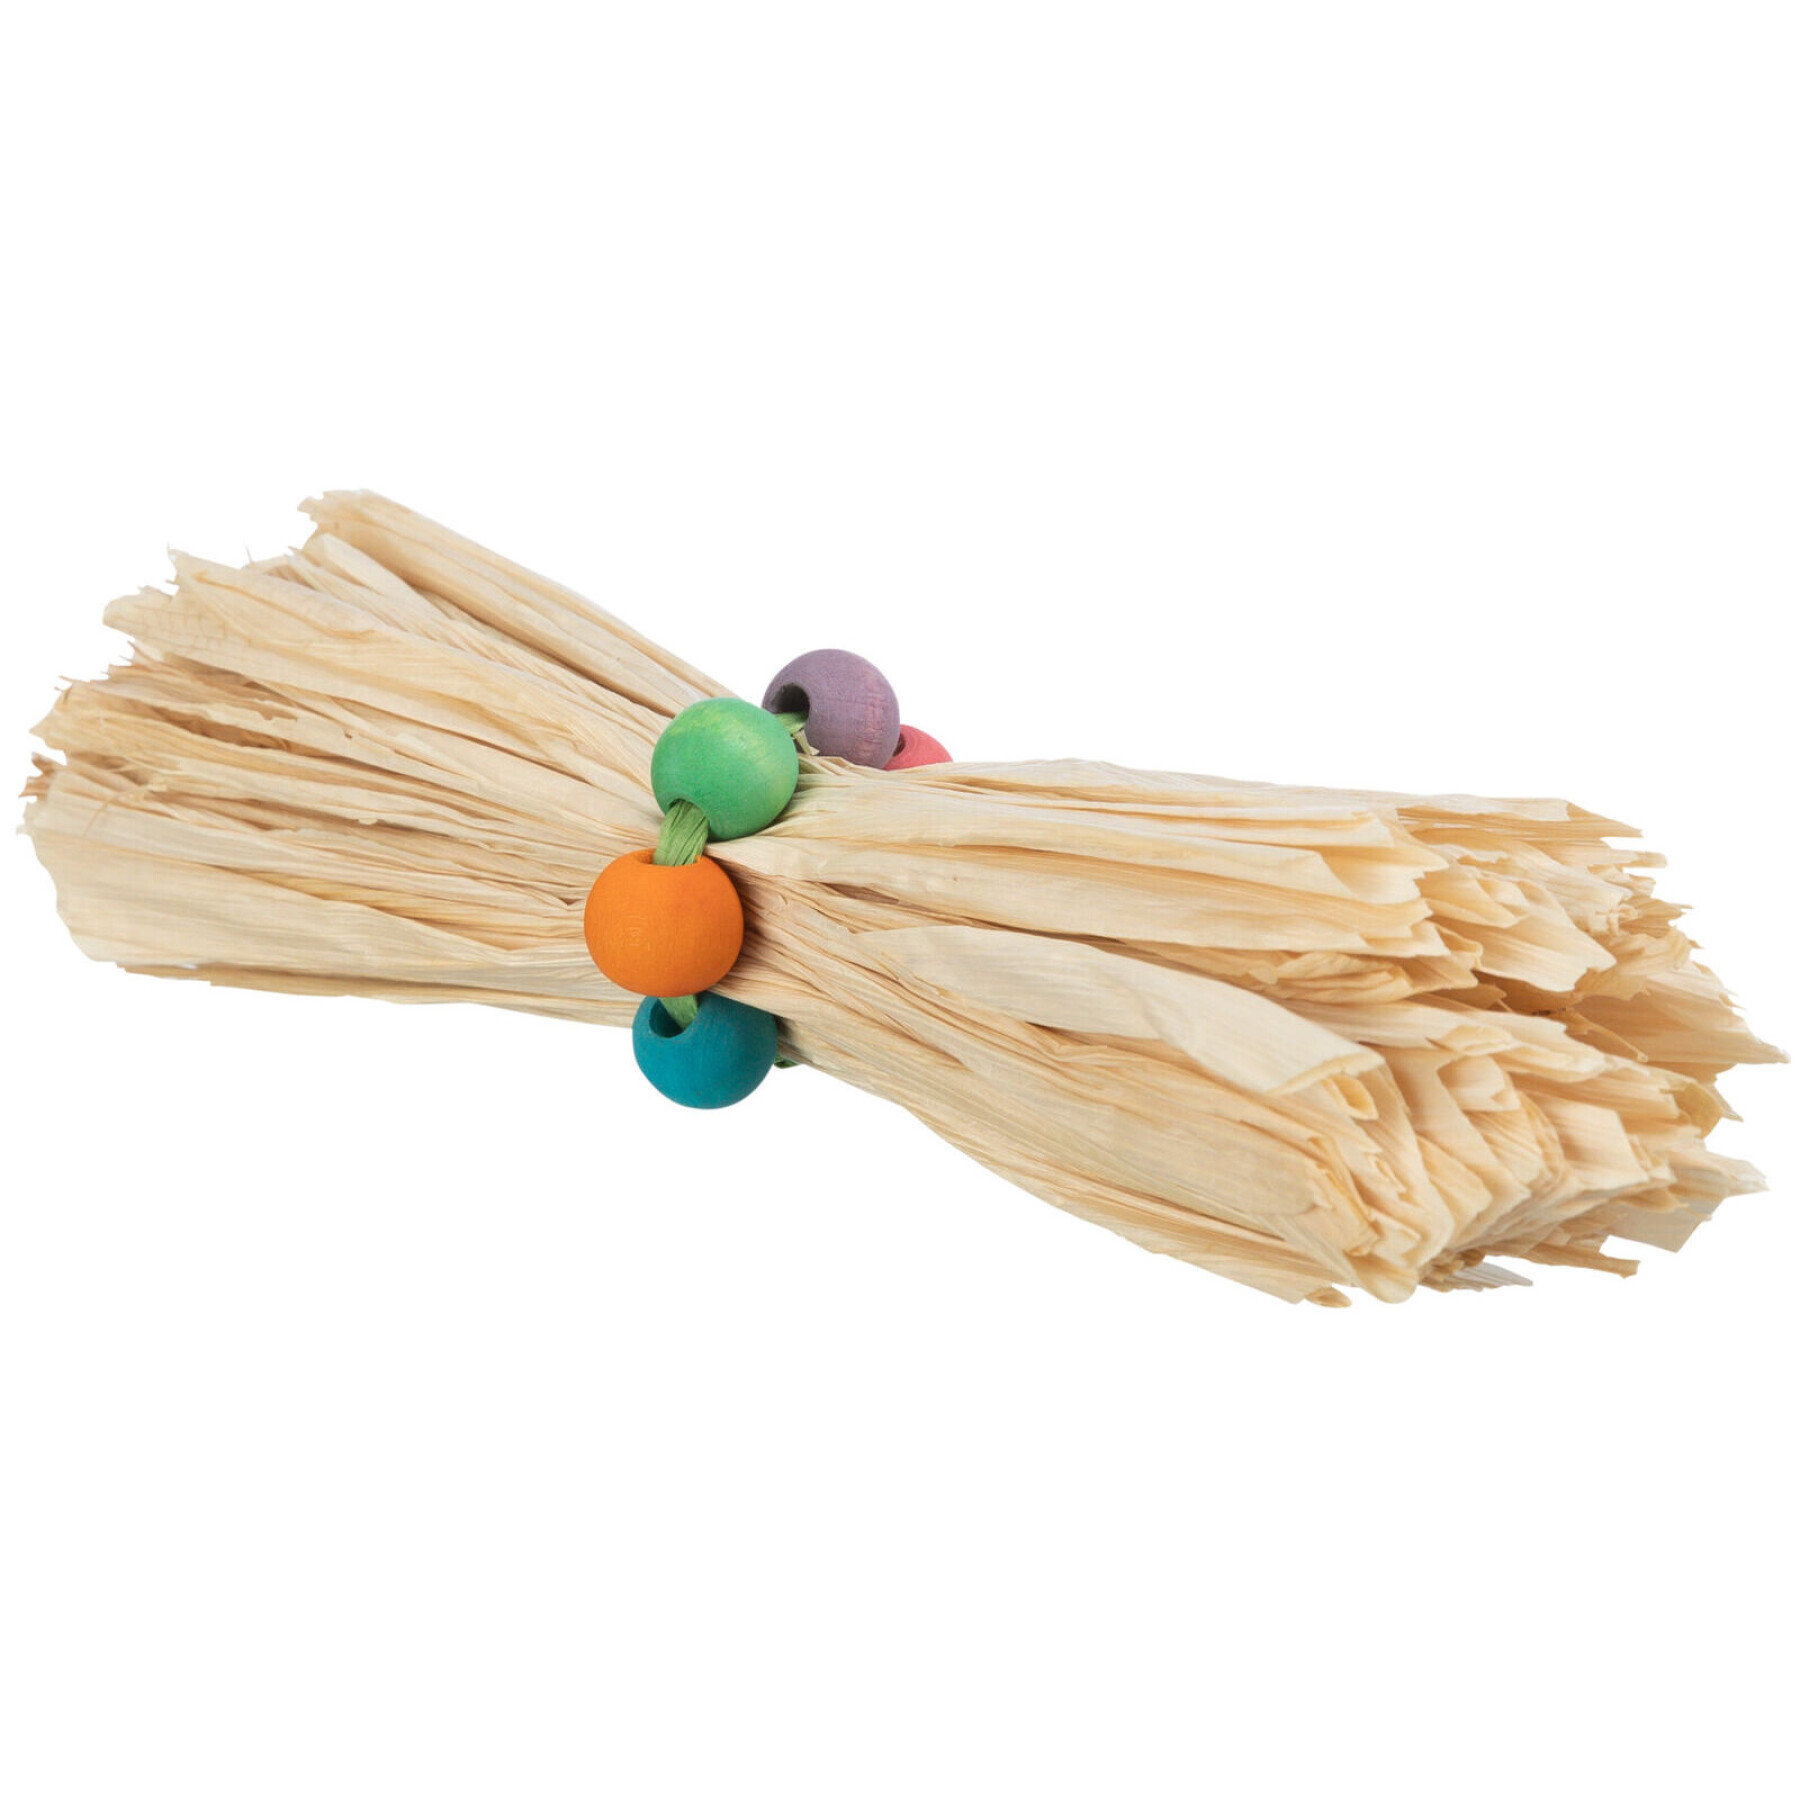 Rodent toy with corn leaf and wooden beads Trixie (x4)